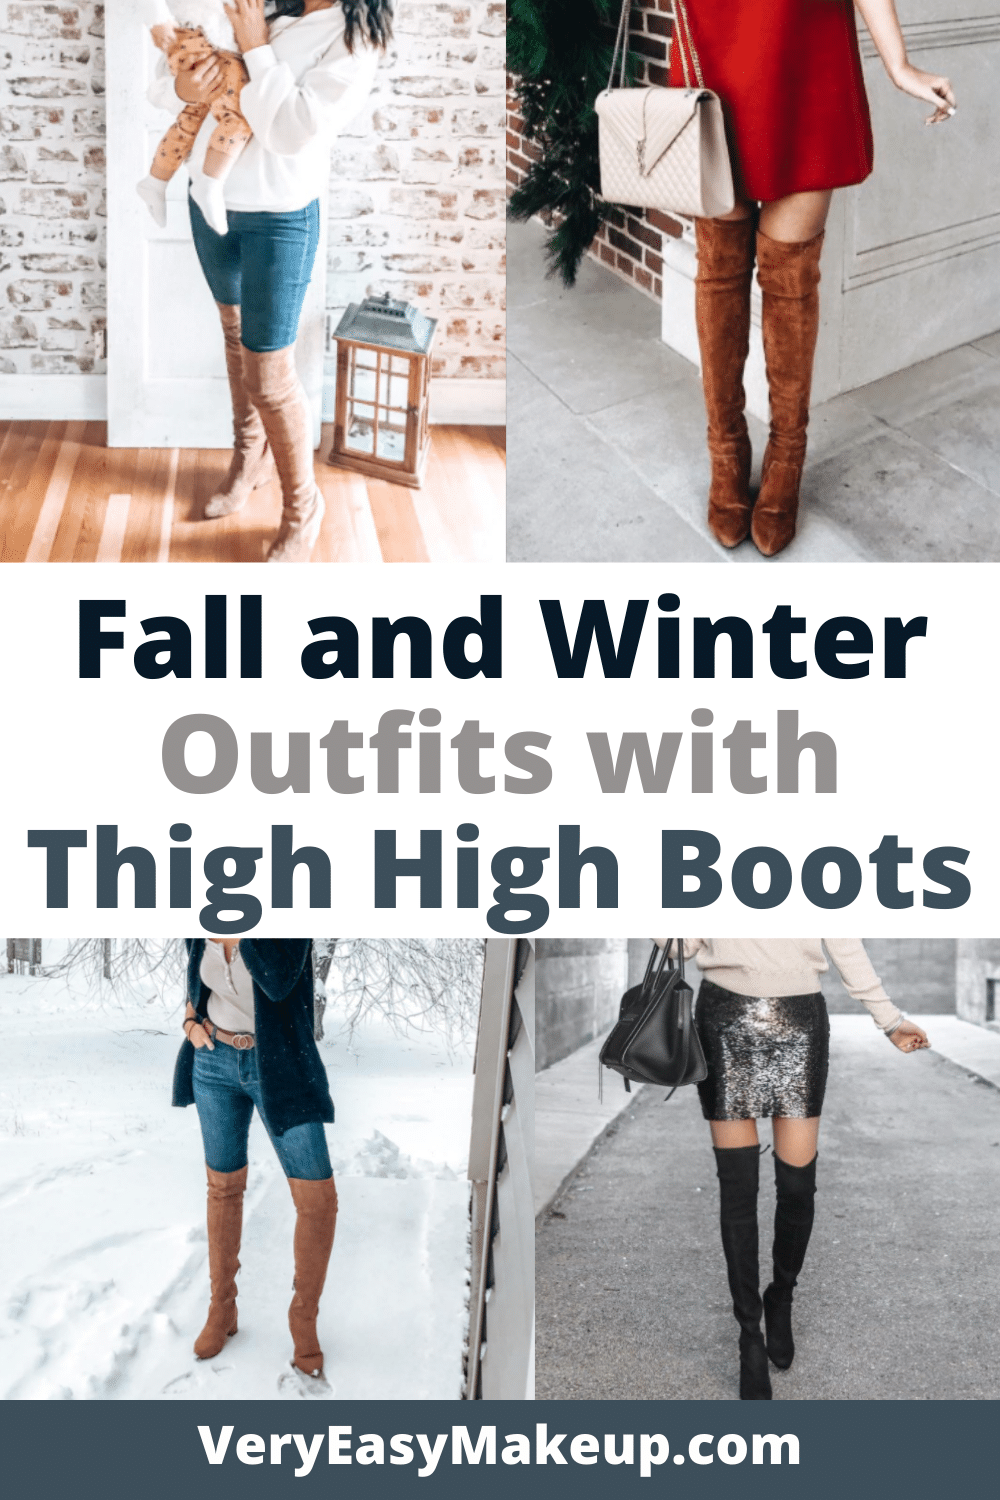 Fall and Winter Outfits with Thigh High Boots by Very Easy Makeup